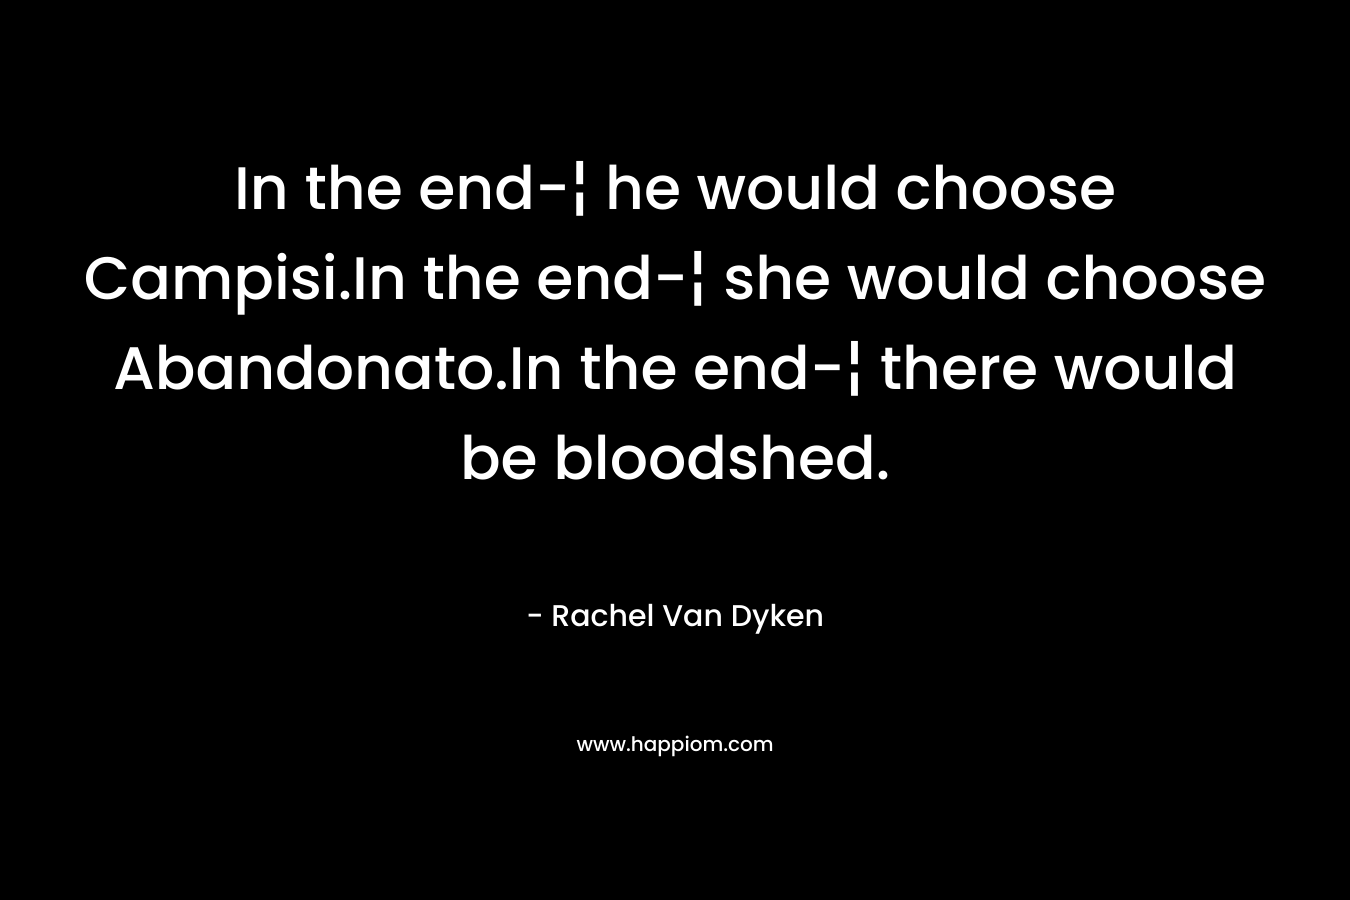 In the end-¦ he would choose Campisi.In the end-¦ she would choose Abandonato.In the end-¦ there would be bloodshed. – Rachel Van Dyken